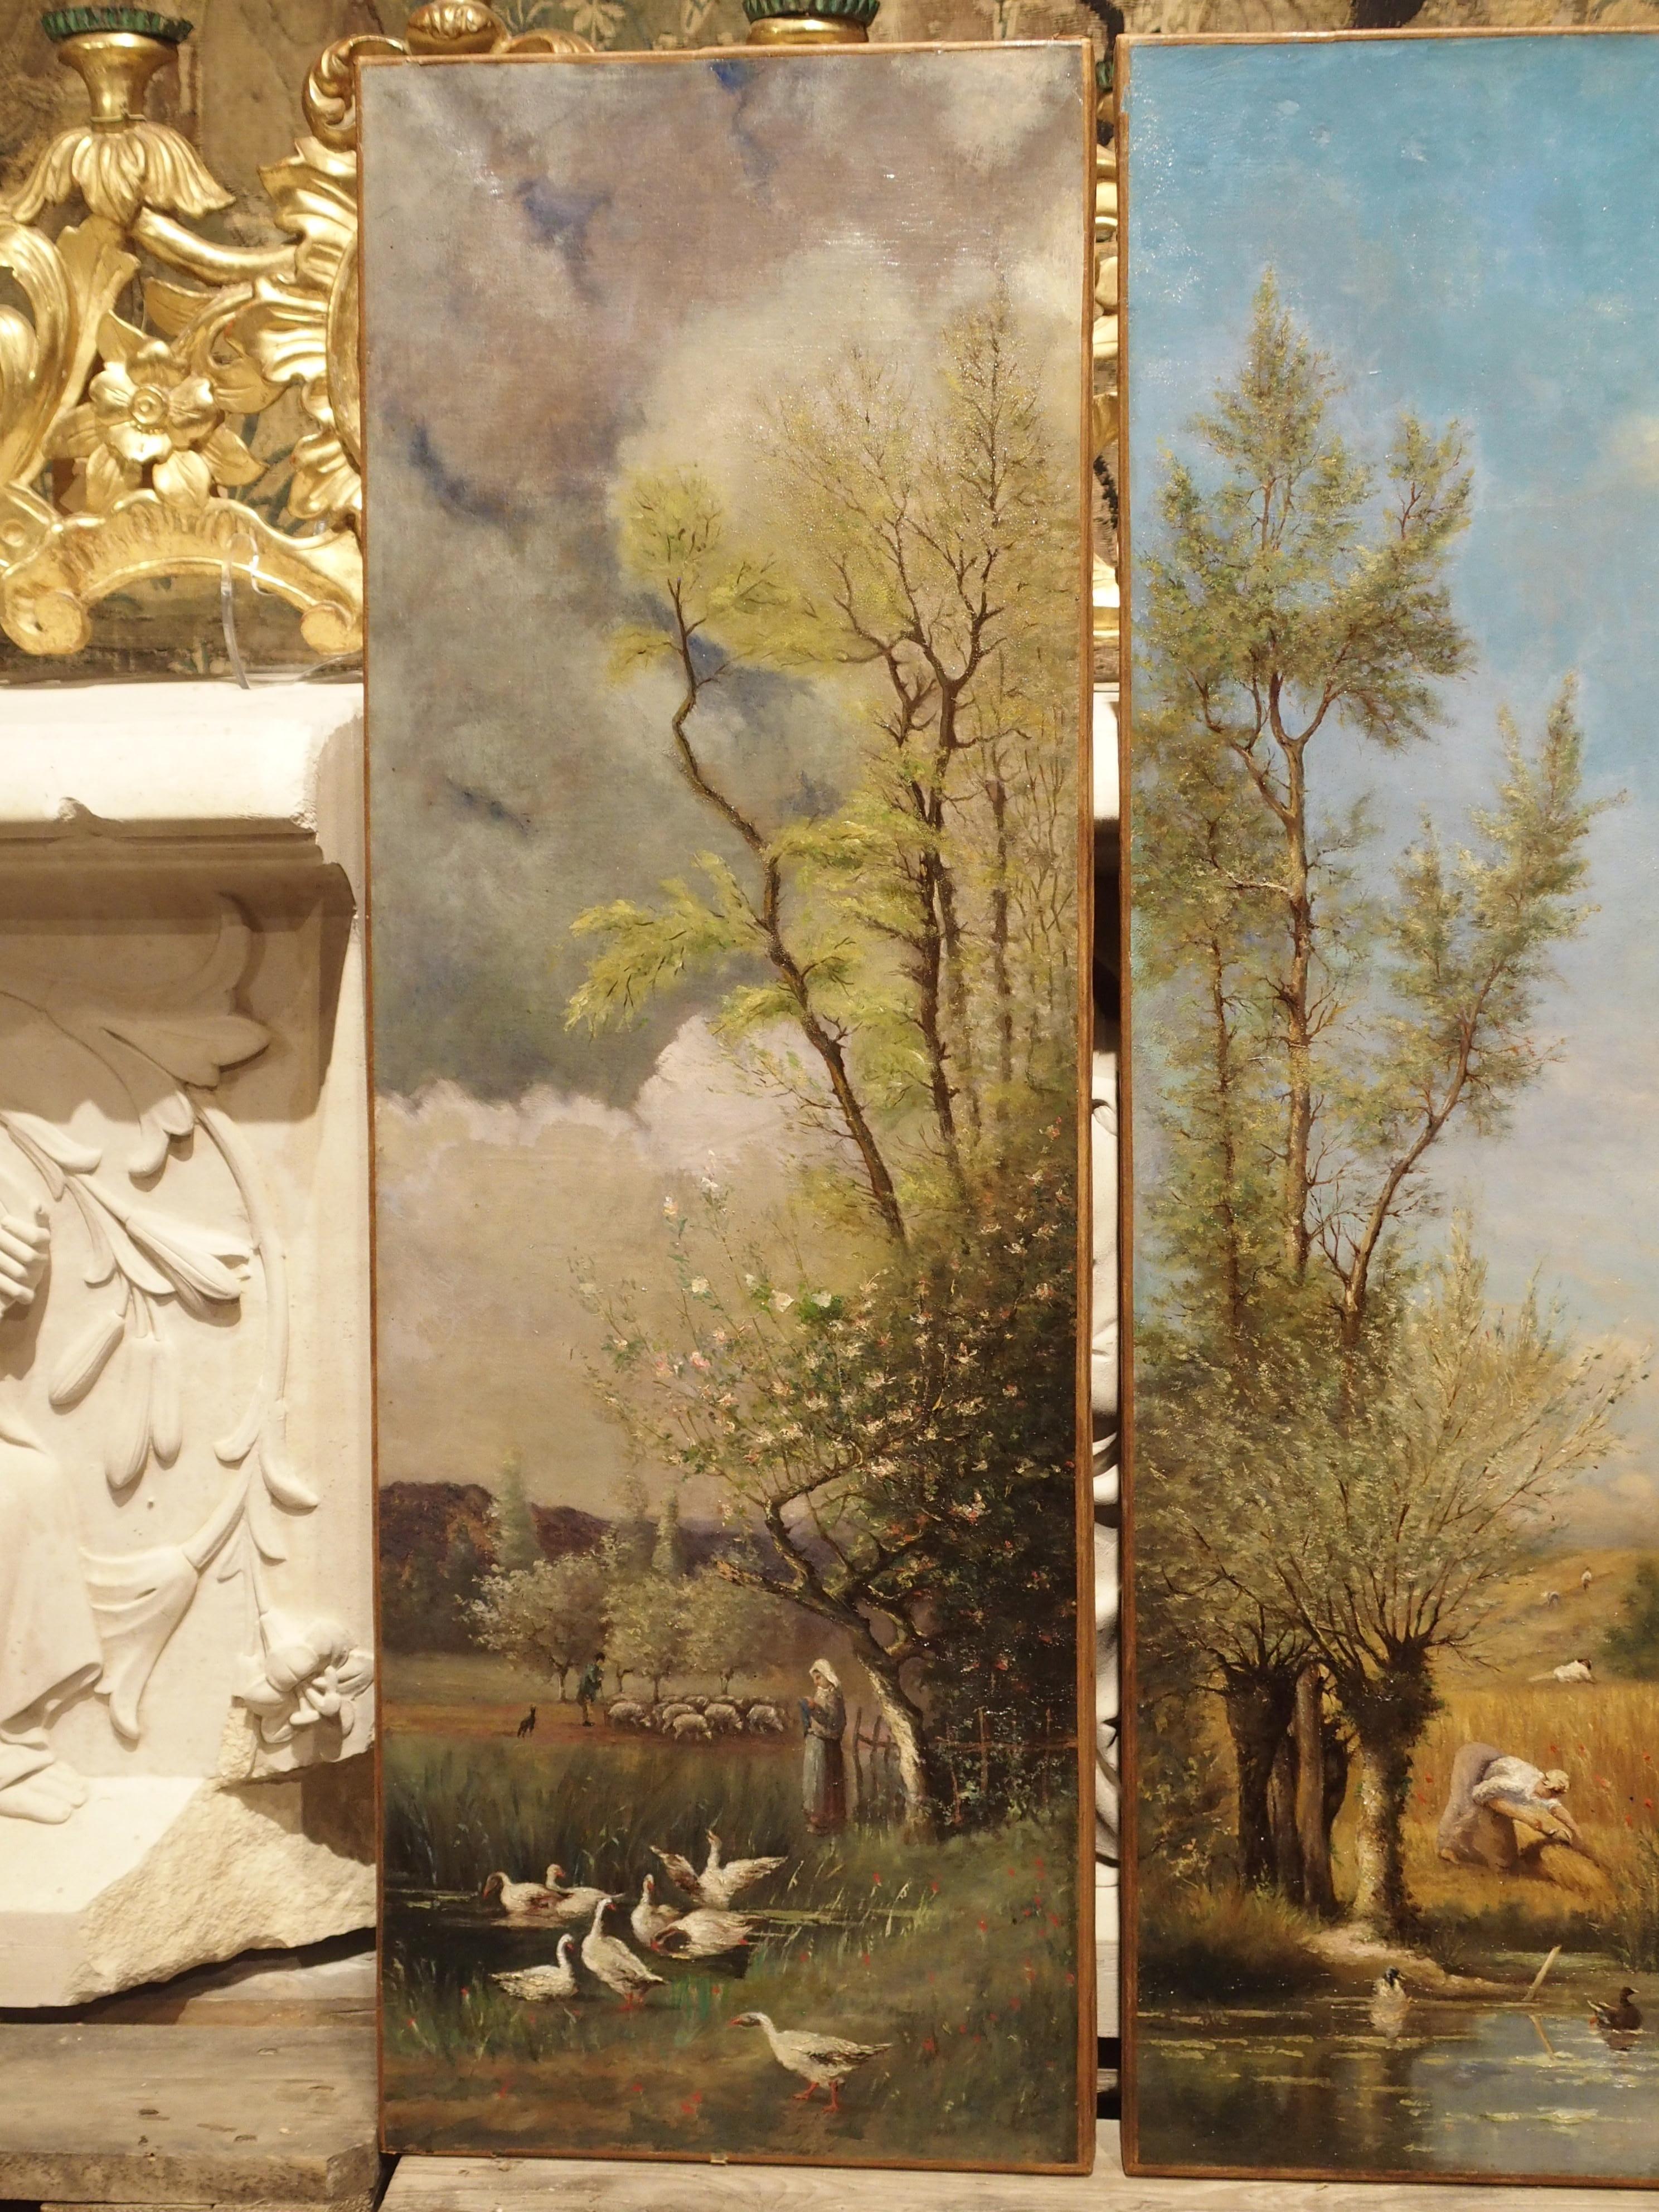 This bright antique quadriptych of the Four Seasons depicts pastoral French landscapes of people and animals in settings of Spring, Summer, Fall, and Winter. Each painting is the same size and features a large tree in its various stages of foliage